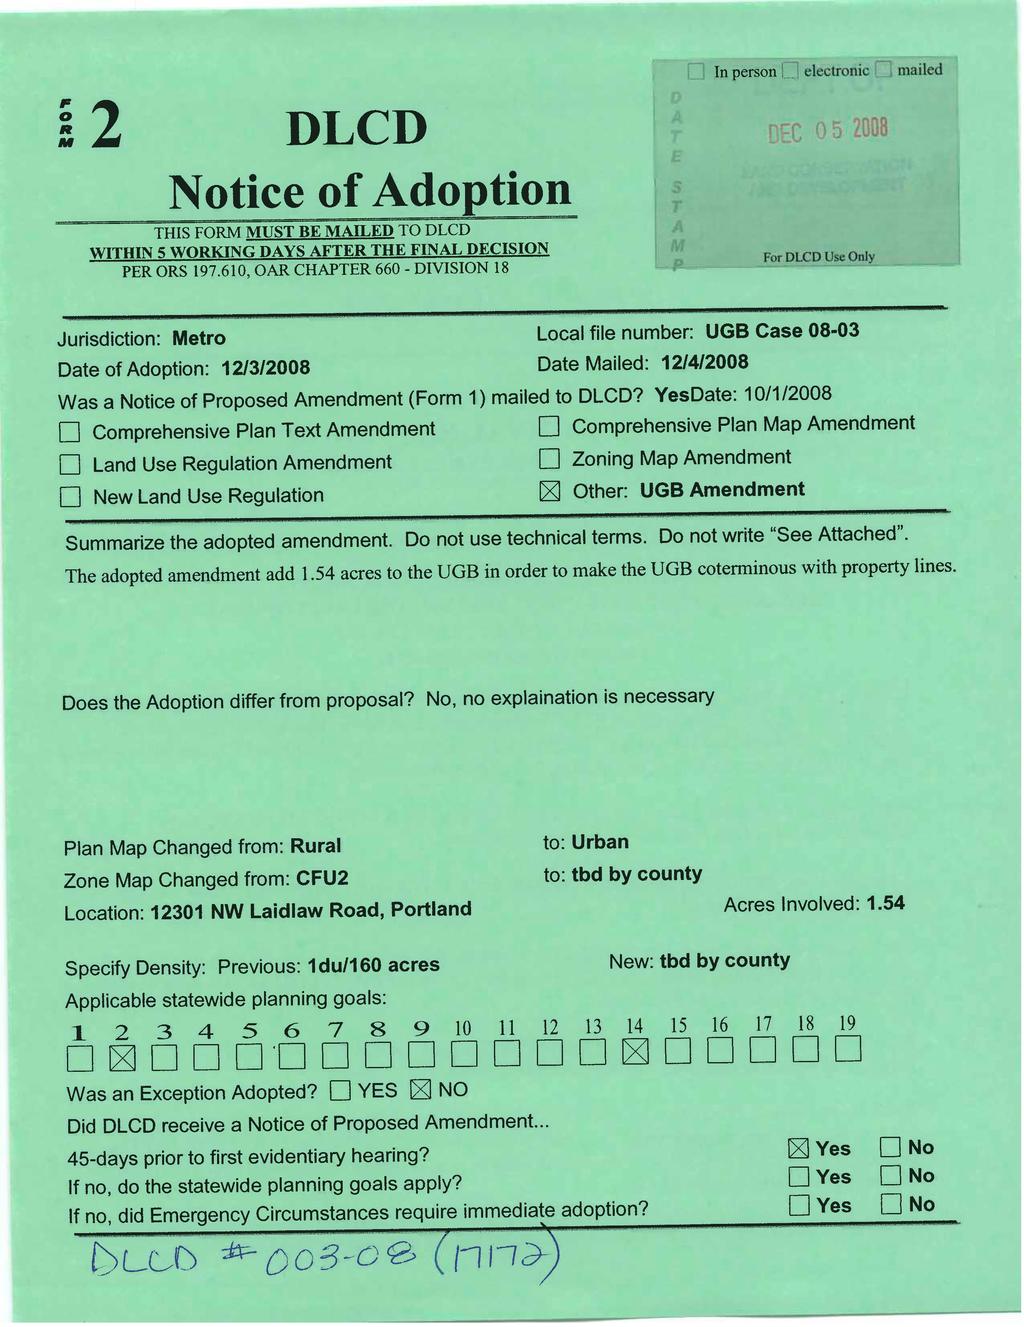 I o ft 2 DLCD Notice of Adoption THIS FORM MUST BE MAILED TO DLCD WITHIN 5 WORKING DAYS AFTER THE FINAL DECISION PER ORS 97.60, OAR CHAPTER 660 - DIVISION 8 I T I M In person!